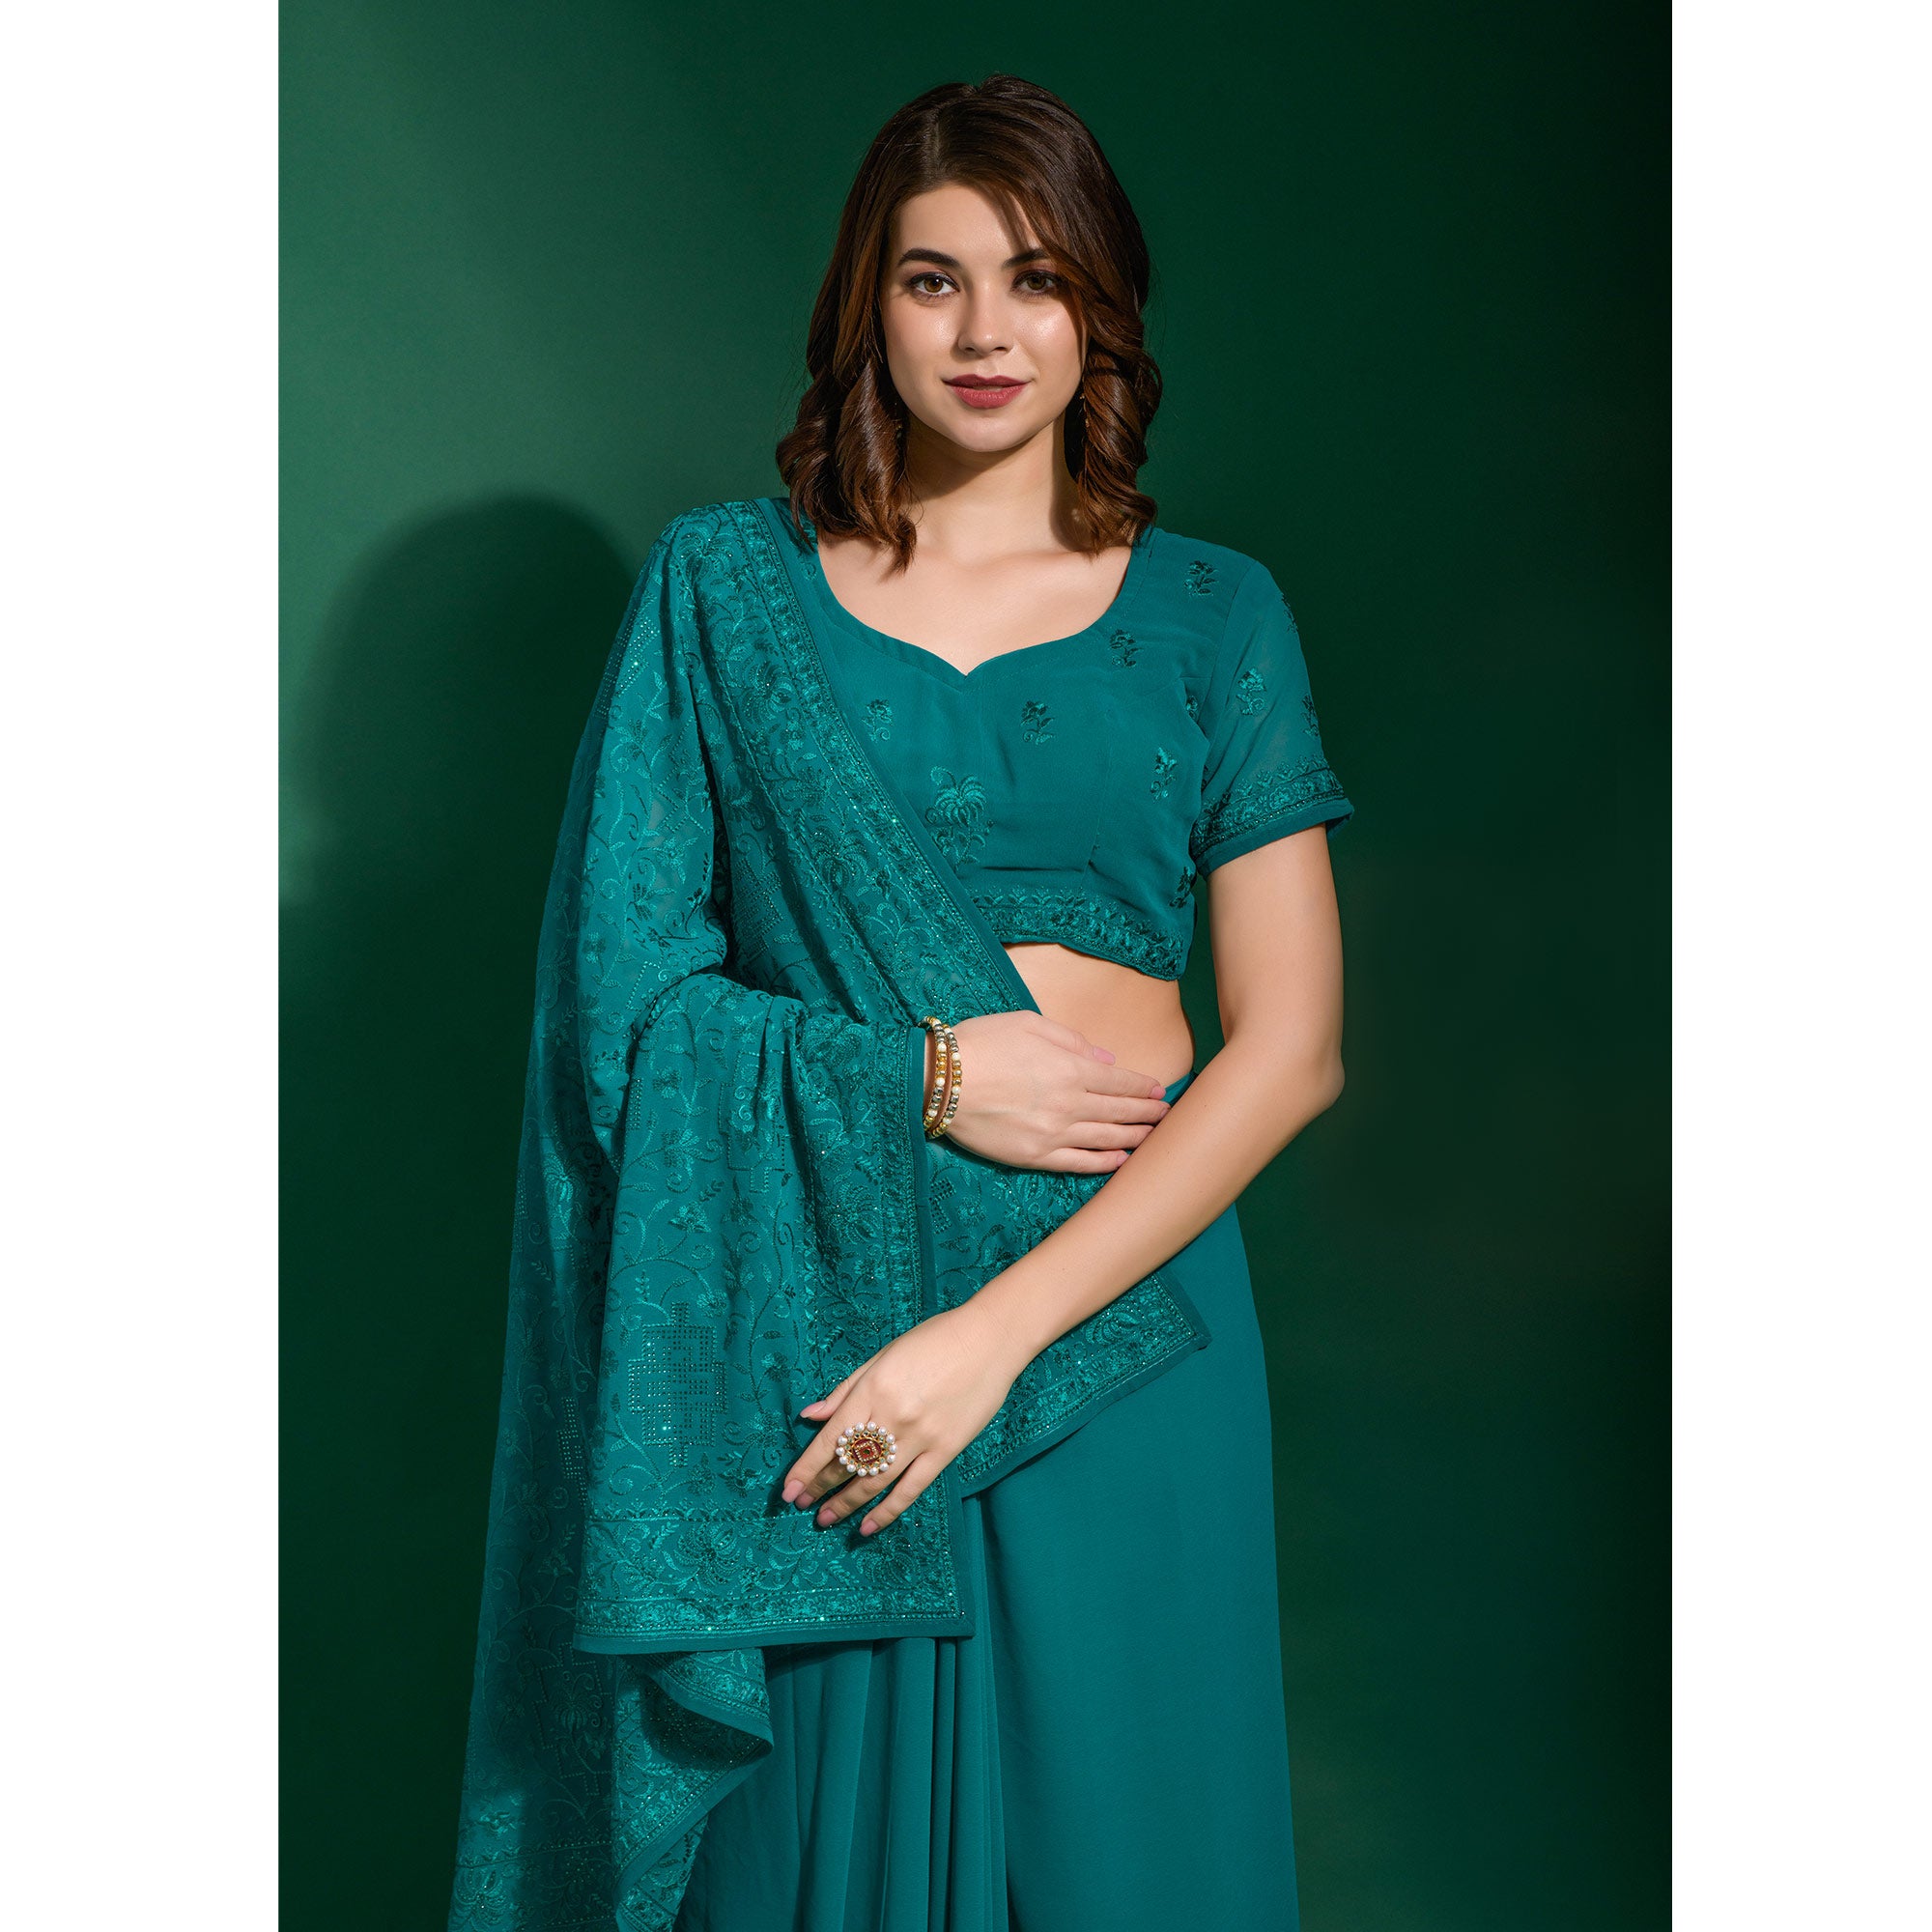 Teal Blue Floral Embroidered Georgette Saree